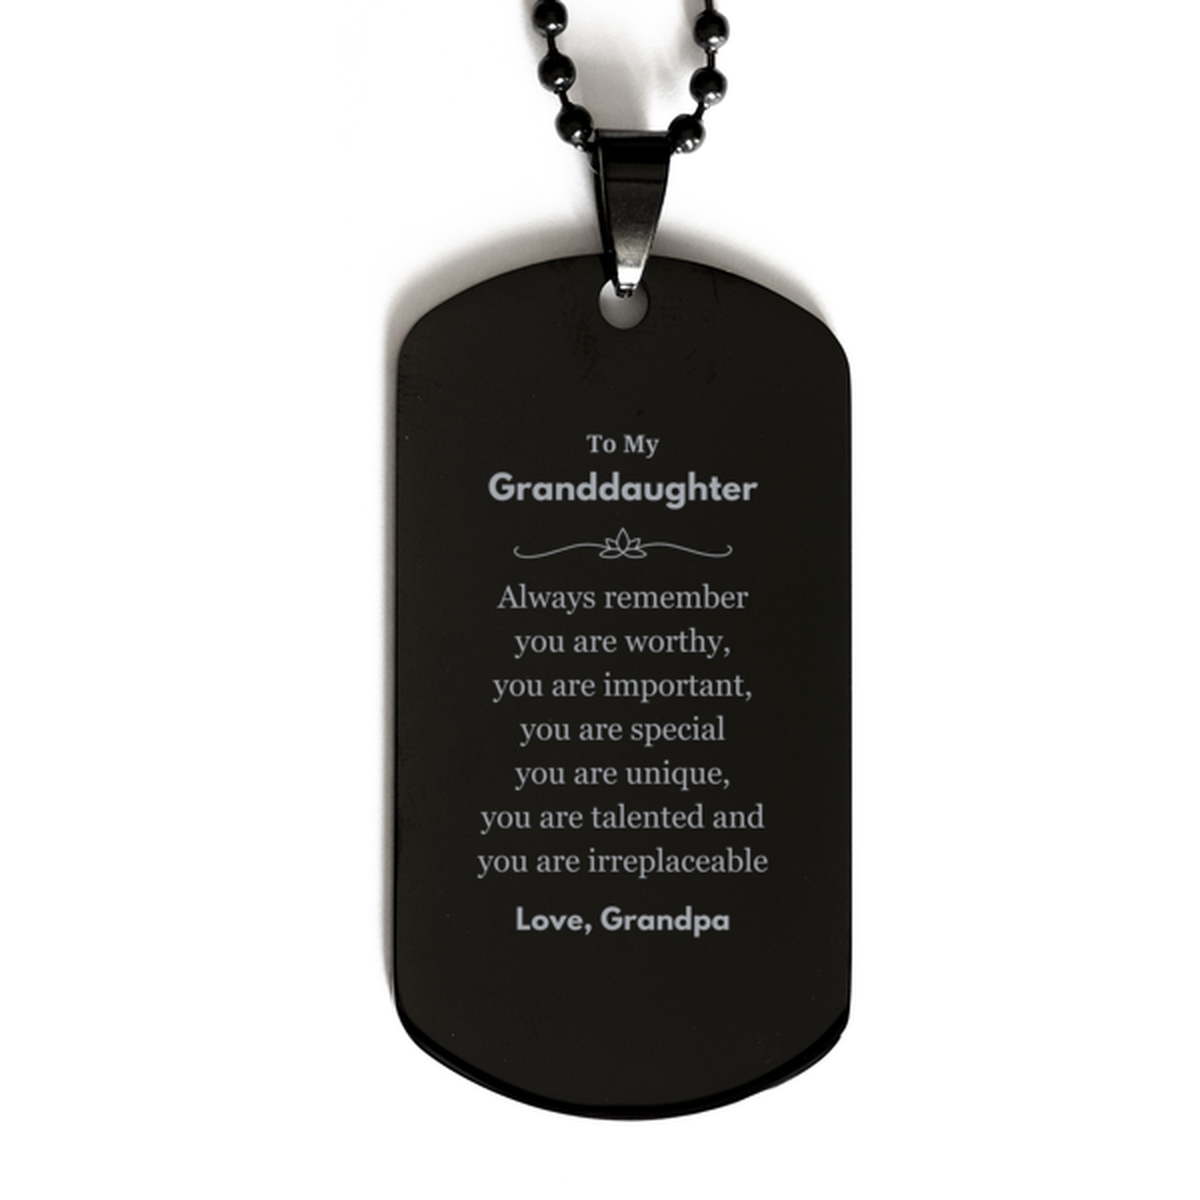 Granddaughter Birthday Gifts from Grandpa, Inspirational Black Dog Tag for Granddaughter Christmas Graduation Gifts for Granddaughter Always remember you are worthy, you are important. Love, Grandpa